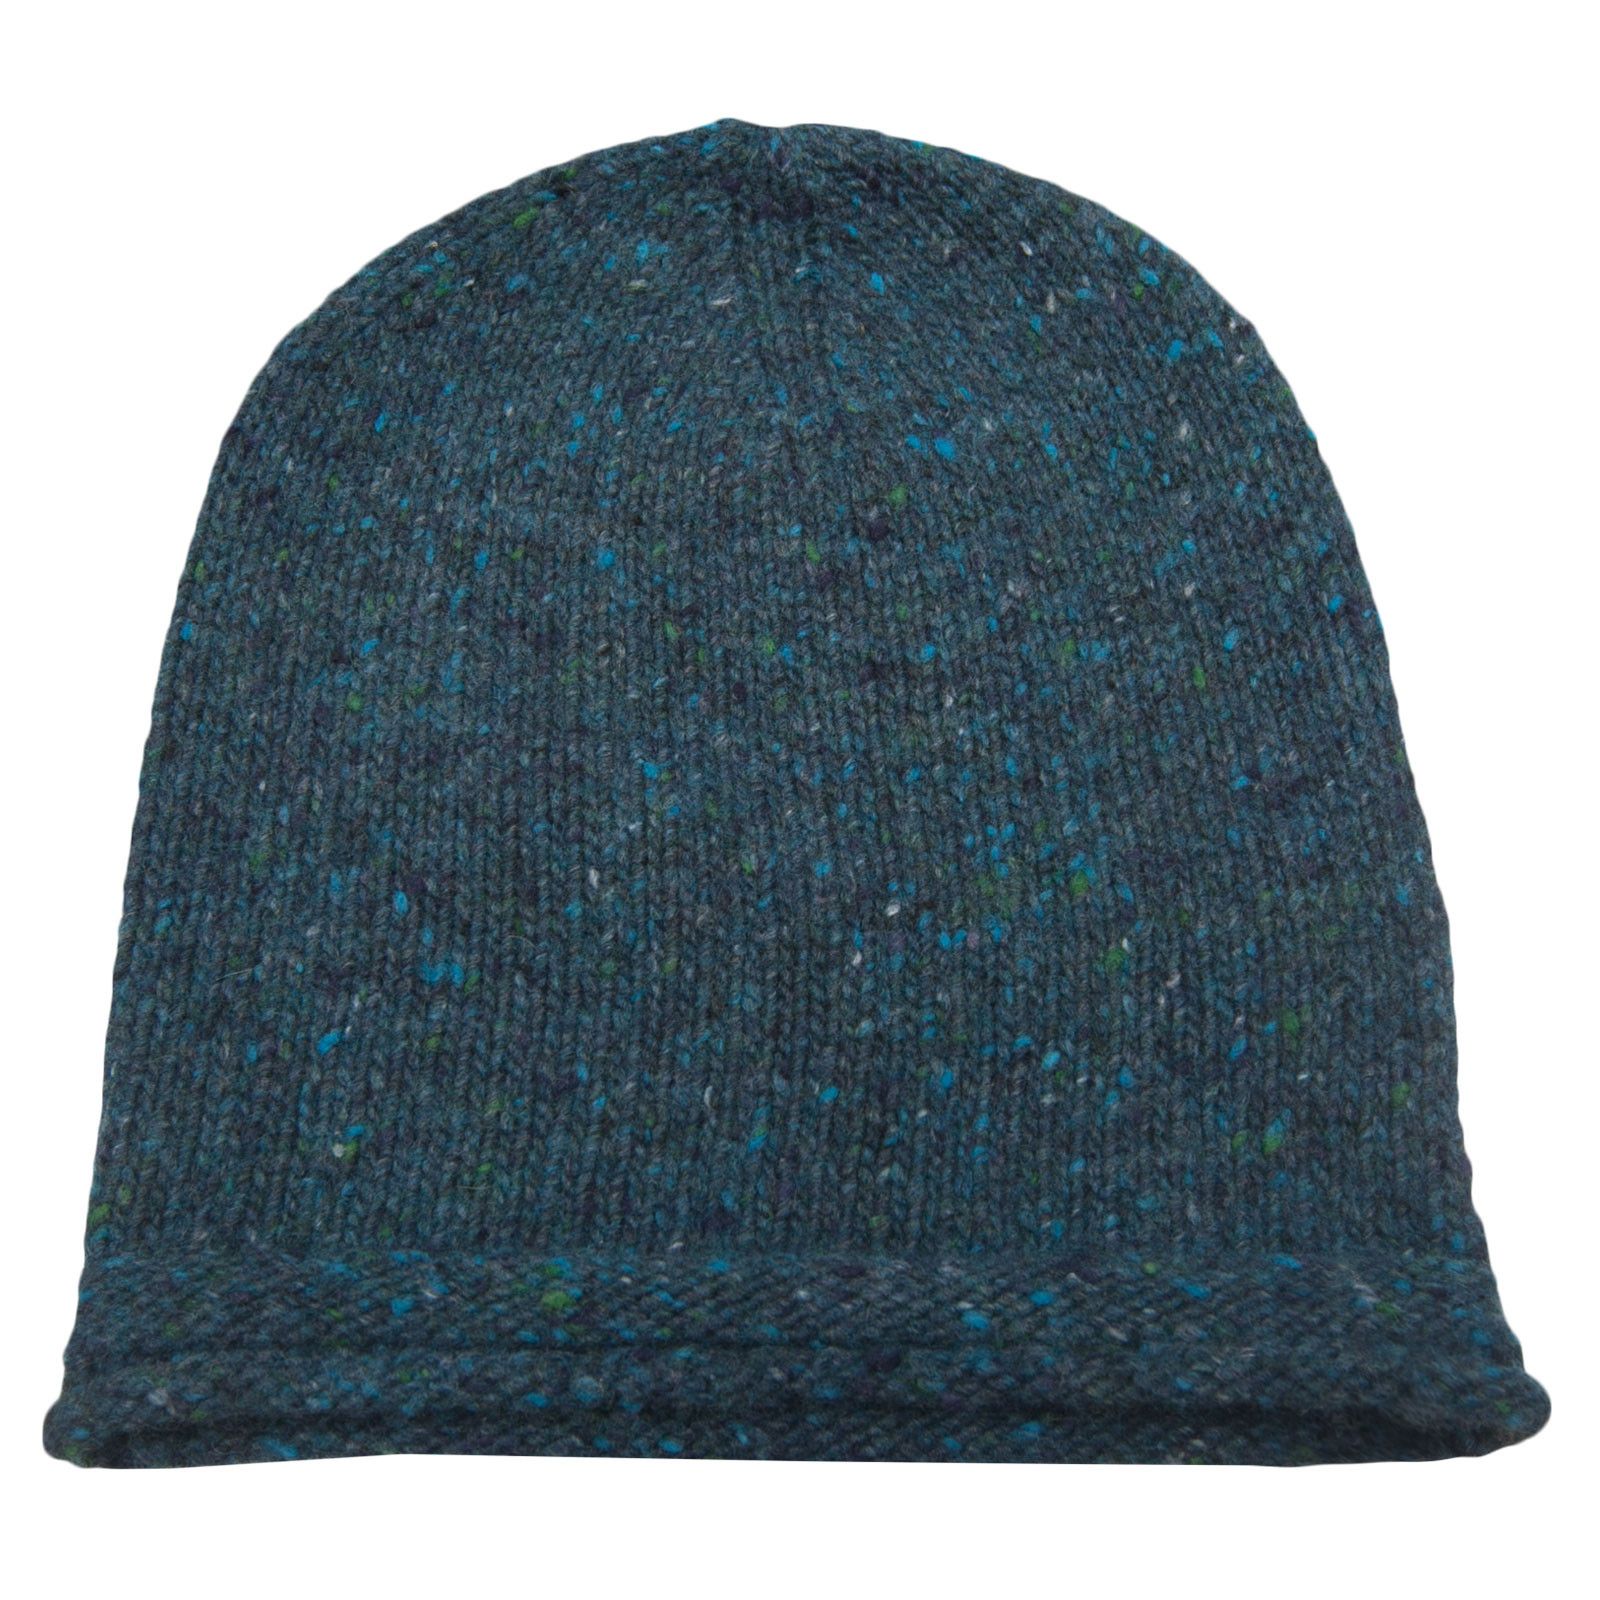 Boys Navy Blue Knitted Wool Hat - CÉMAROSE | Children's Fashion Store - 2